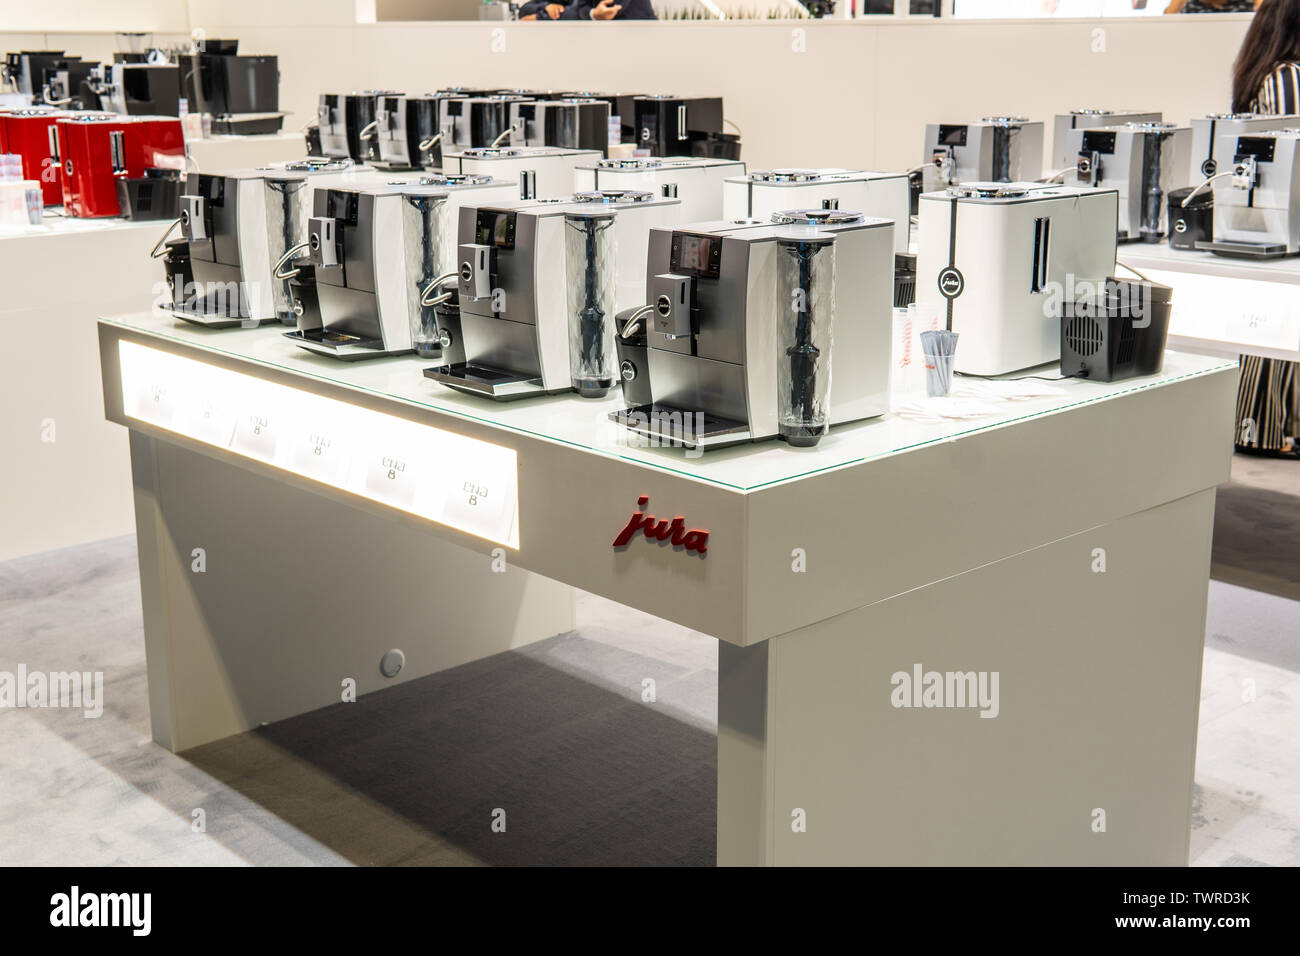 Berlin, Germany, August 29, 2018, Jura automatic coffee machines at JURA exhibition pavilion, stand at Global Innovations Show IFA 2018 Stock Photo